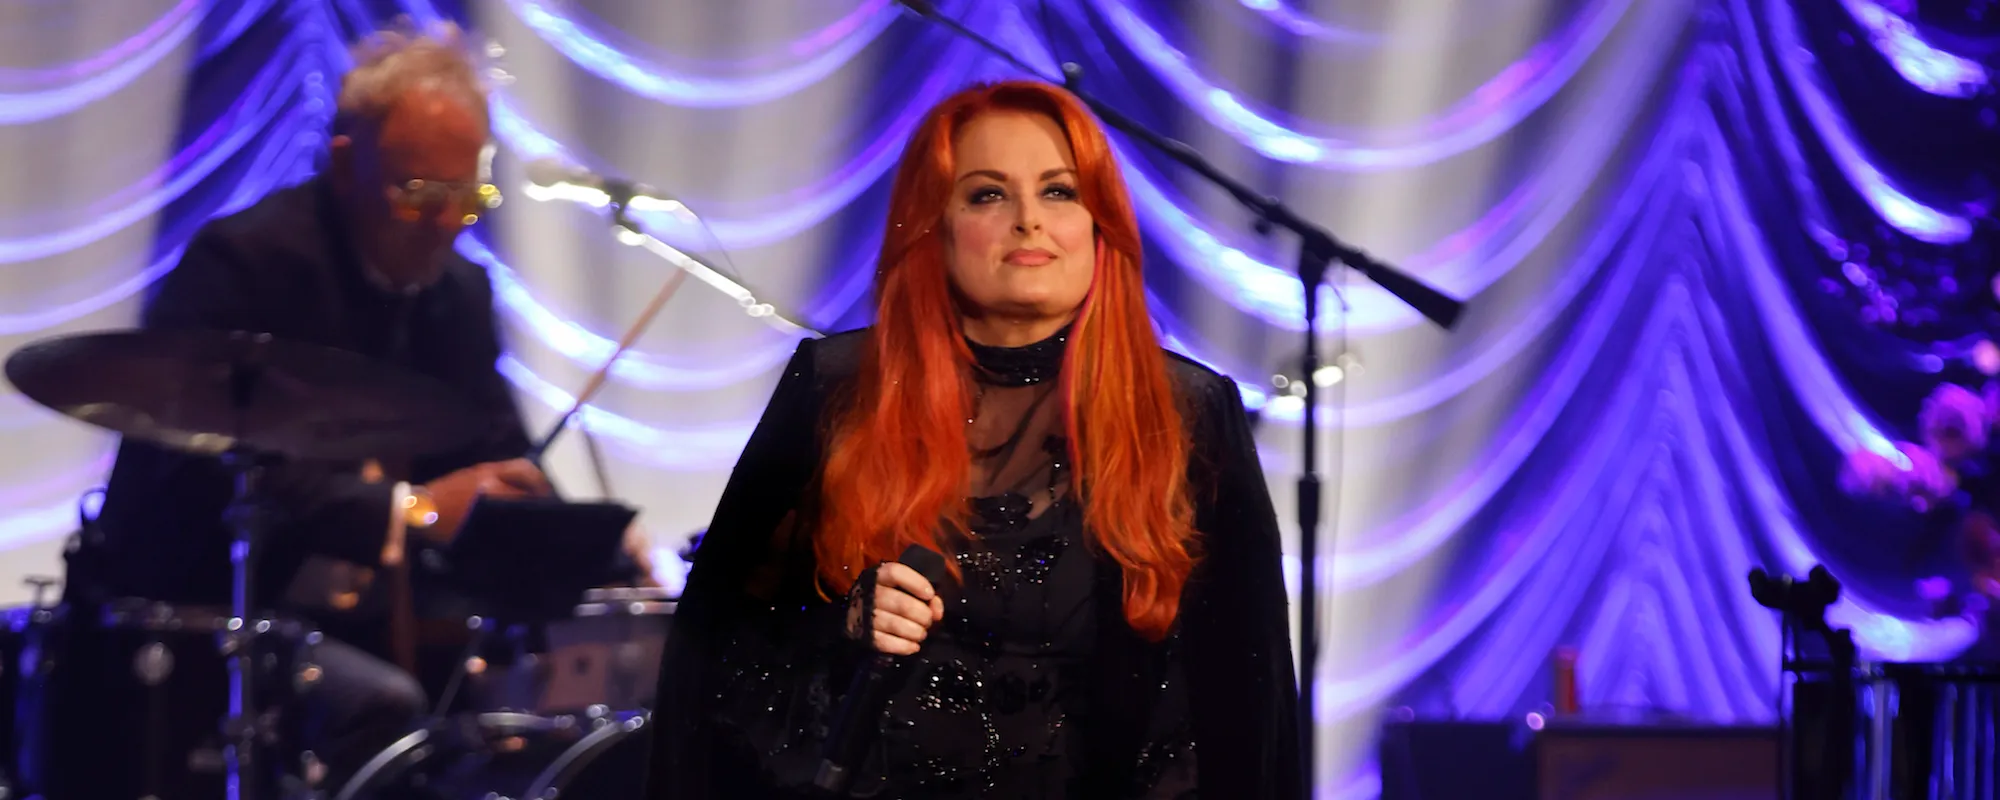 For the First Time, Wynonna Judd Talks About Mother Naomi Judd’s Death—“I’m Just Trying to Figure Out What’s Next”